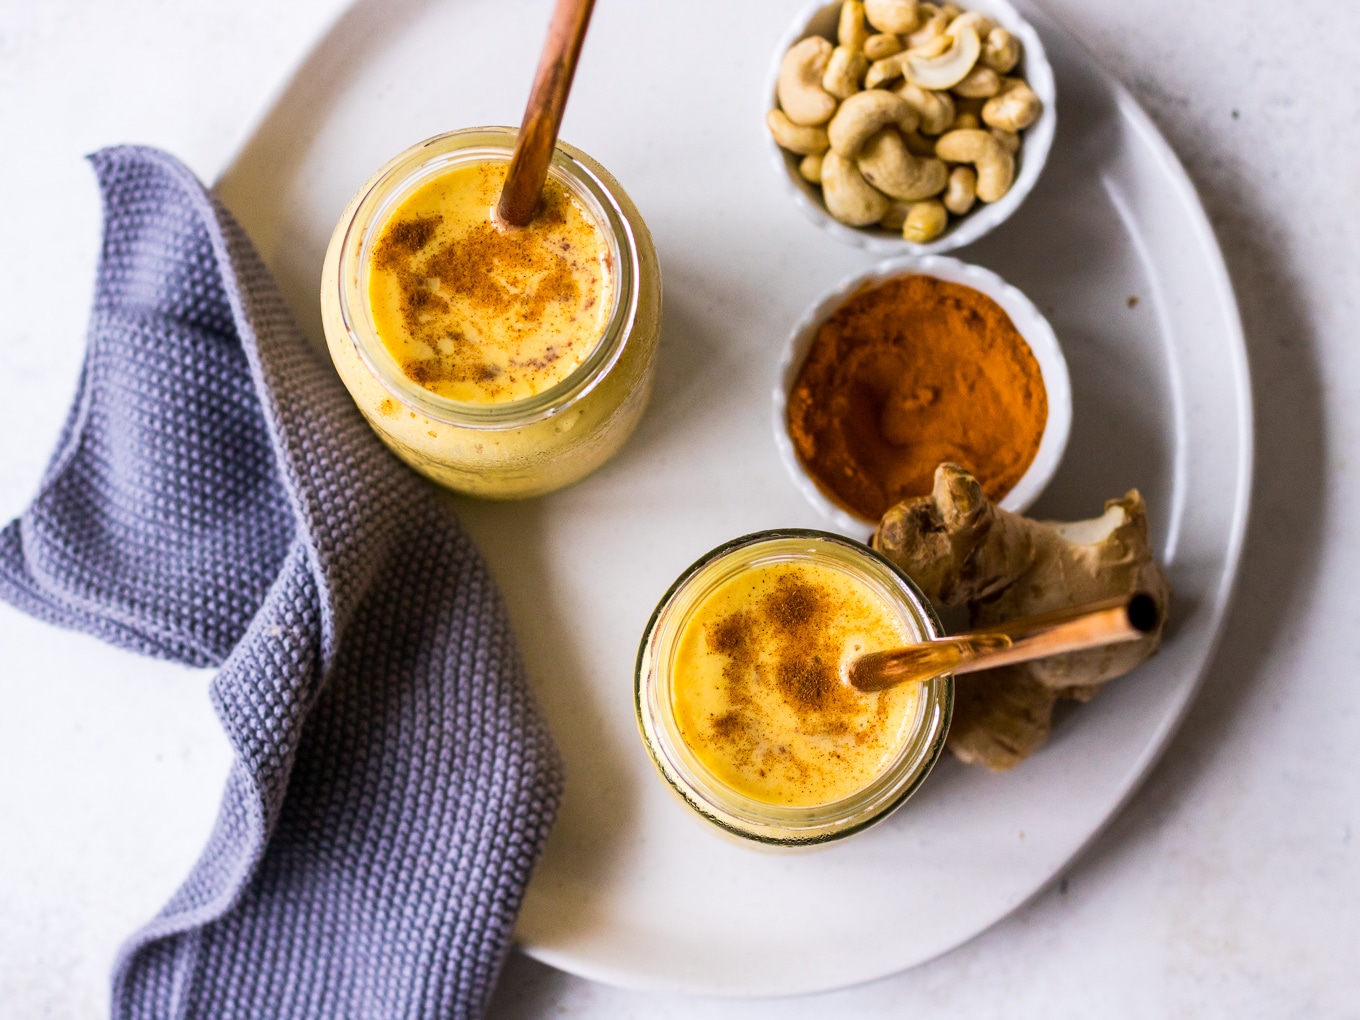 Top down view of turmeric mango smoothie in jars on an irregular white plate